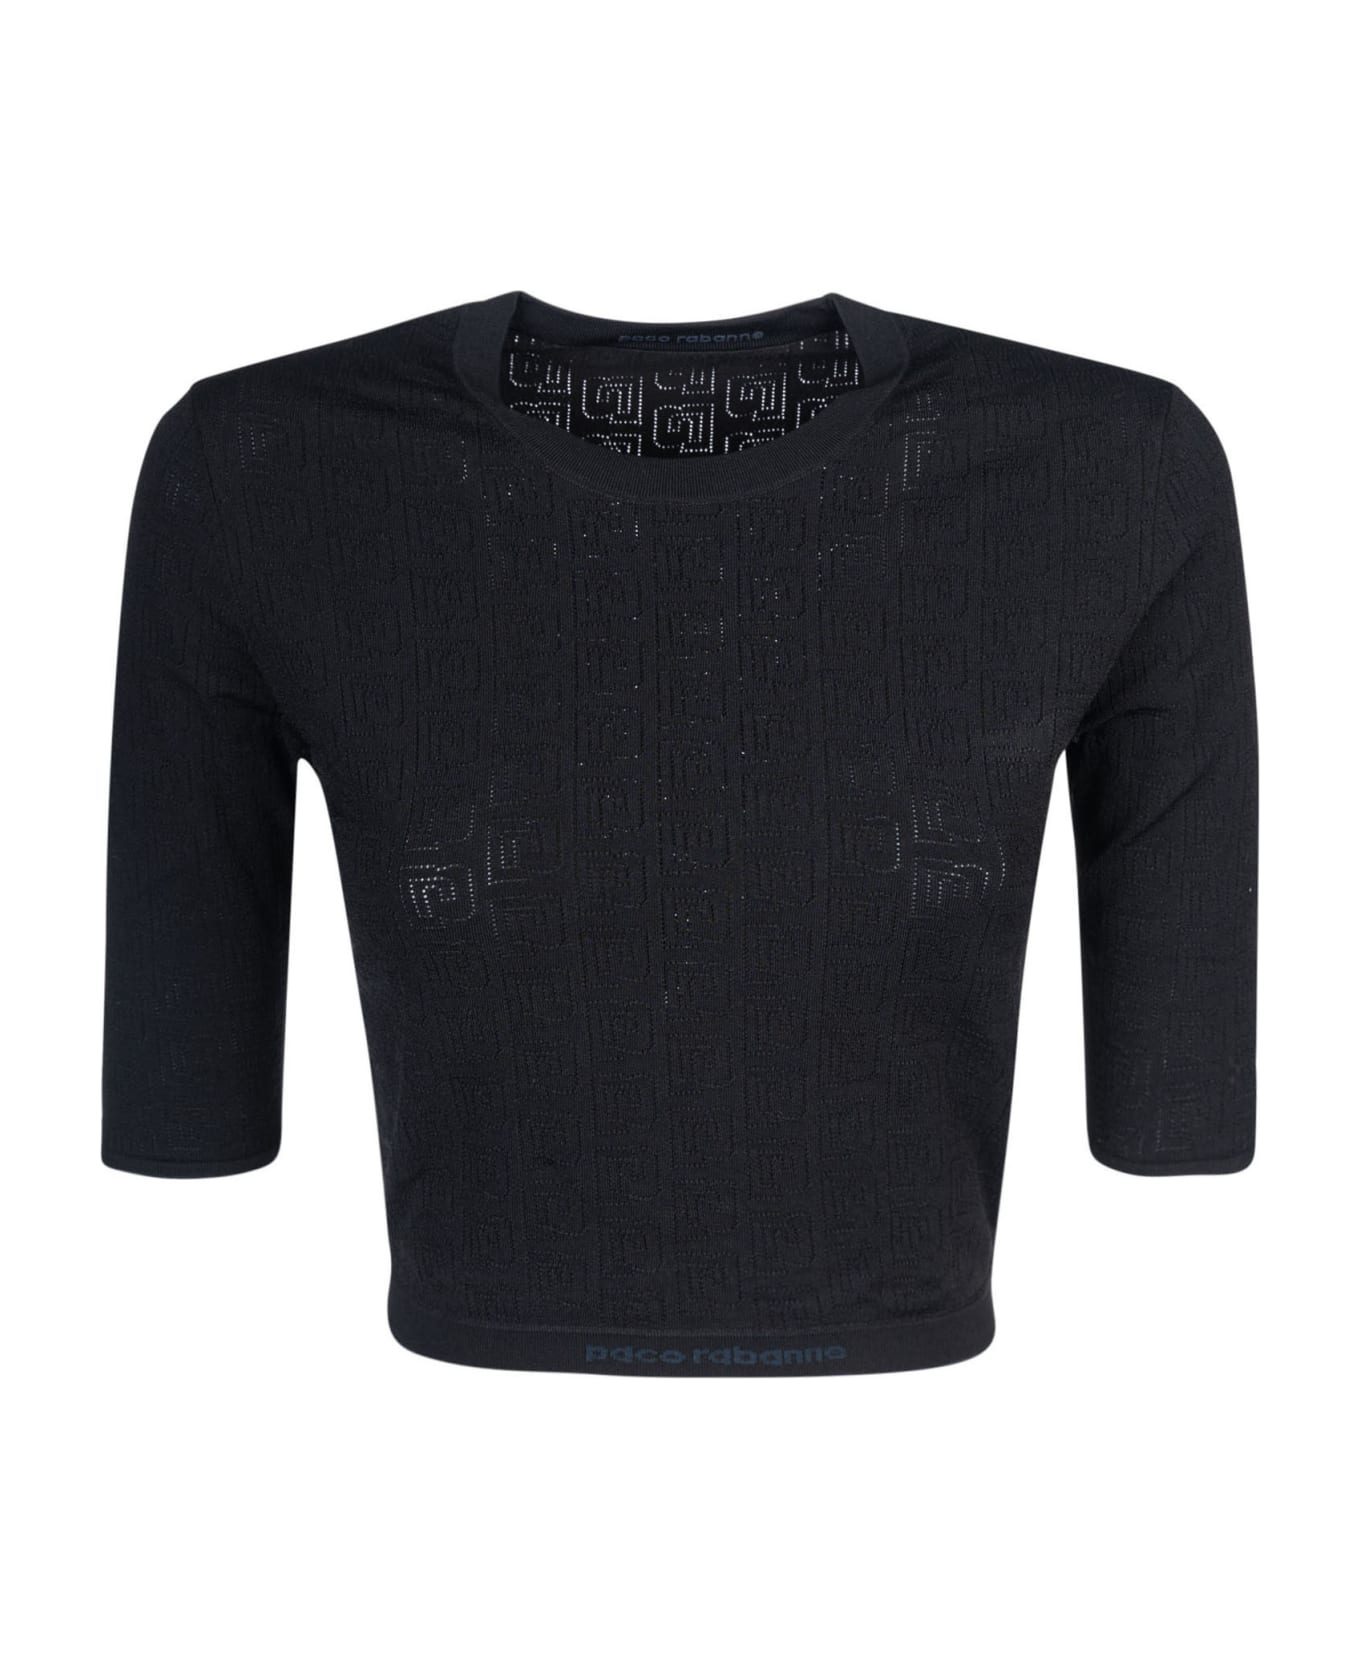 Paco Rabanne Patterned Knit Cropped Top - Black